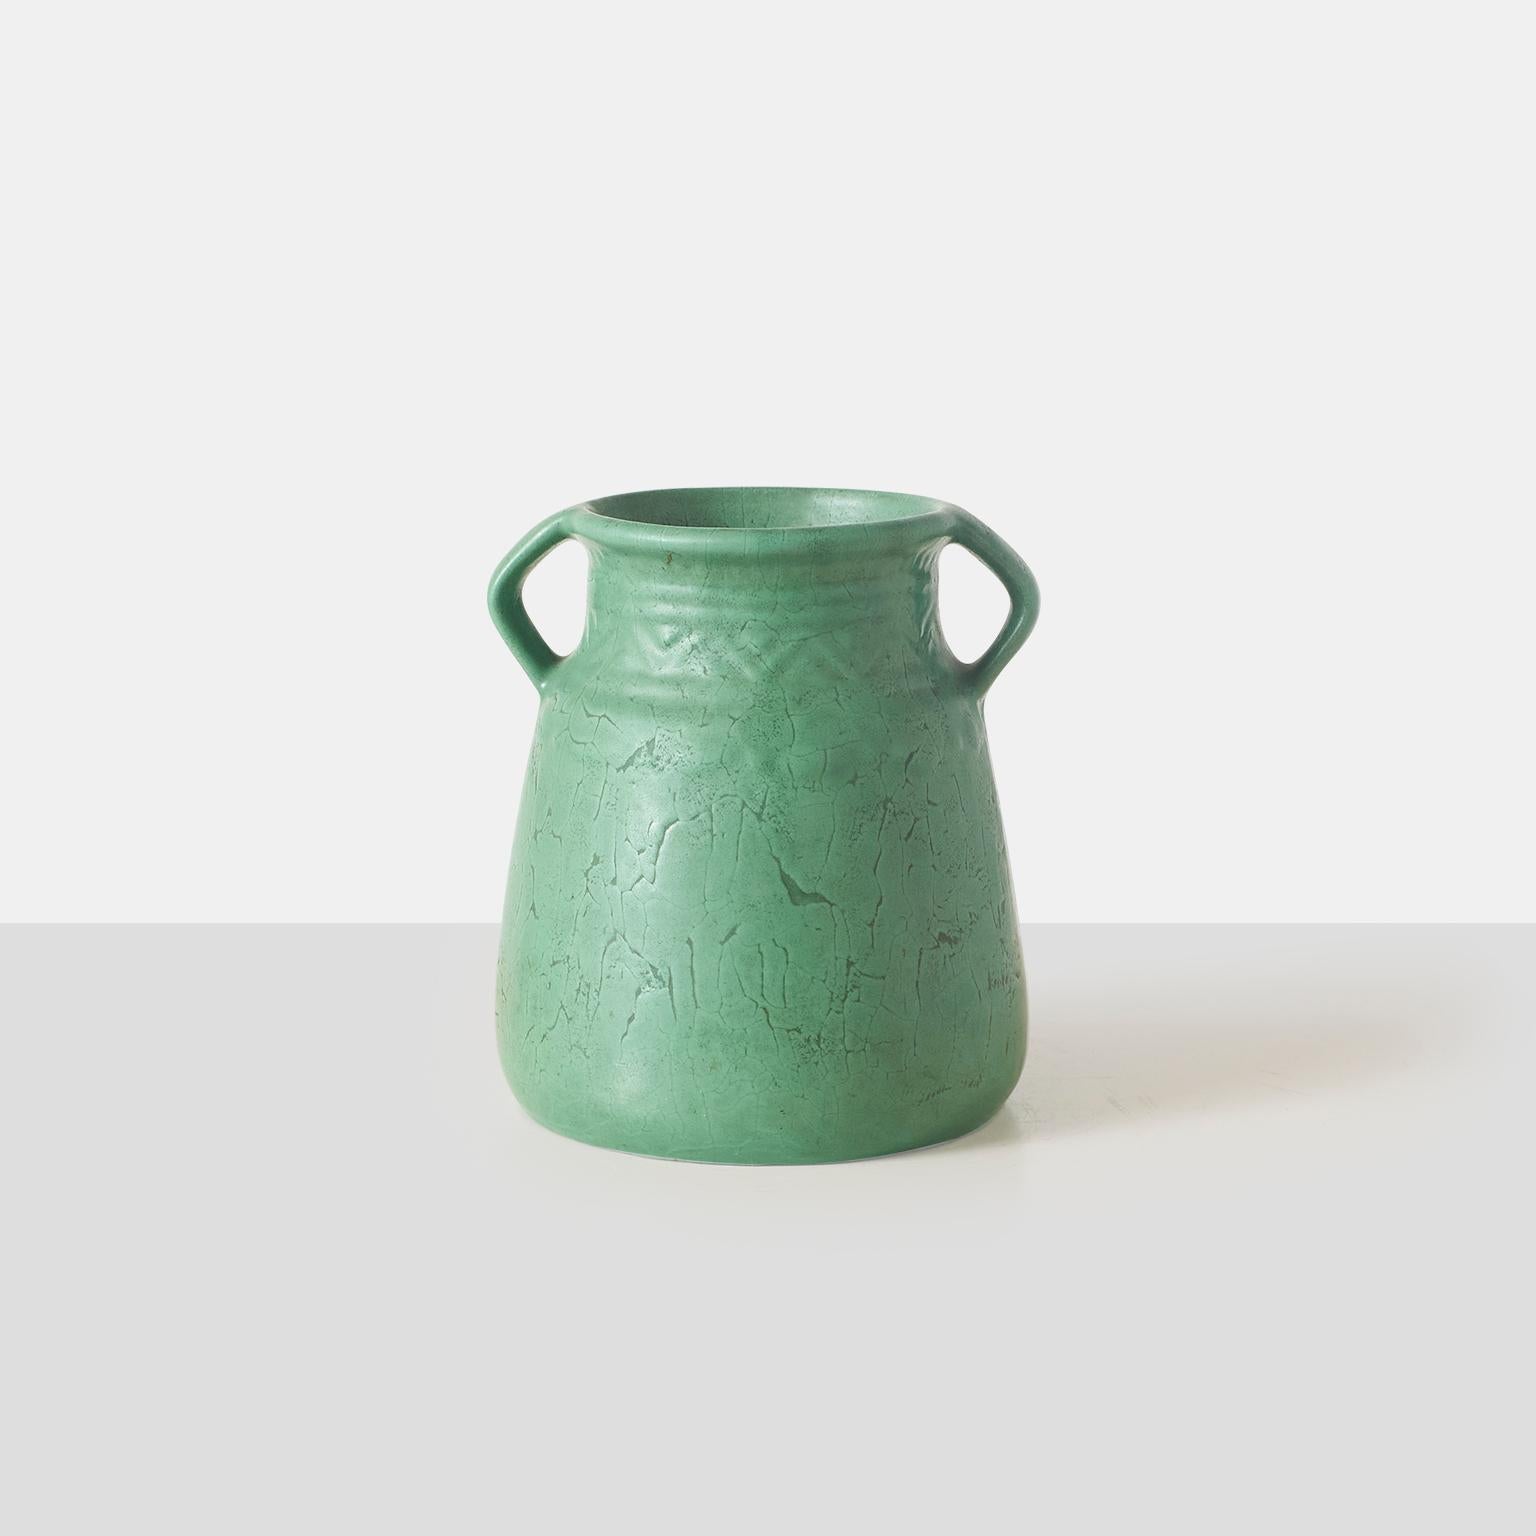 A matte green Arts and Crafts pottery vase with two handles and subtle geometric decoration. Unsigned.